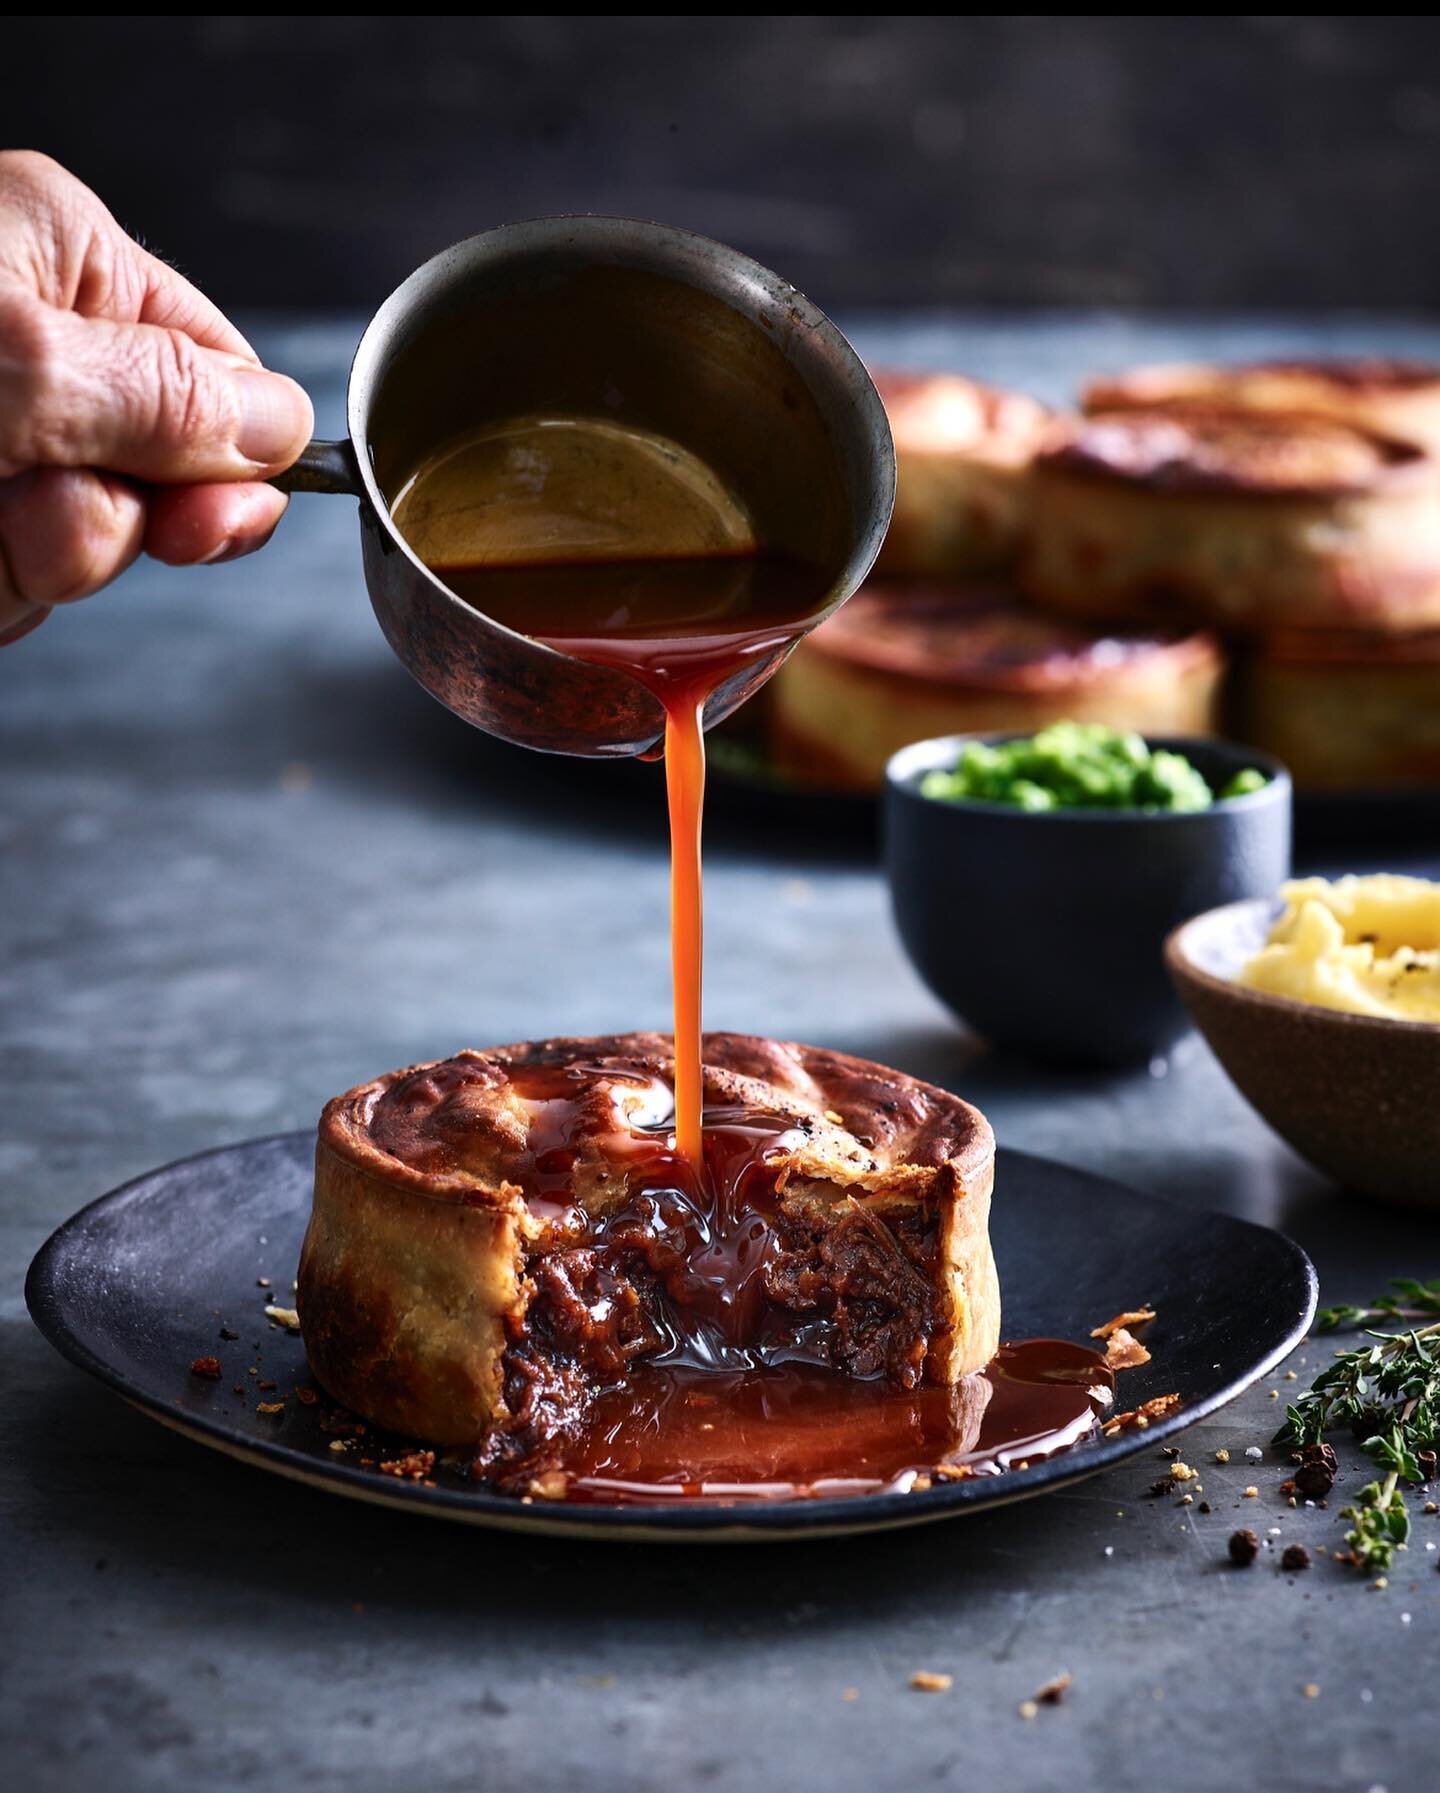 Steak and Ale #fathersday pie.
Slow braised @stoneaxewagyu, @beachesbrewery East Coast IPA, caramelised onions and nigella seeds

Available at @carriageworksfarmersmarket and @nthsydmkts this Saturday only 

 📷 @richard_mortimer_photo1 

Food stylis